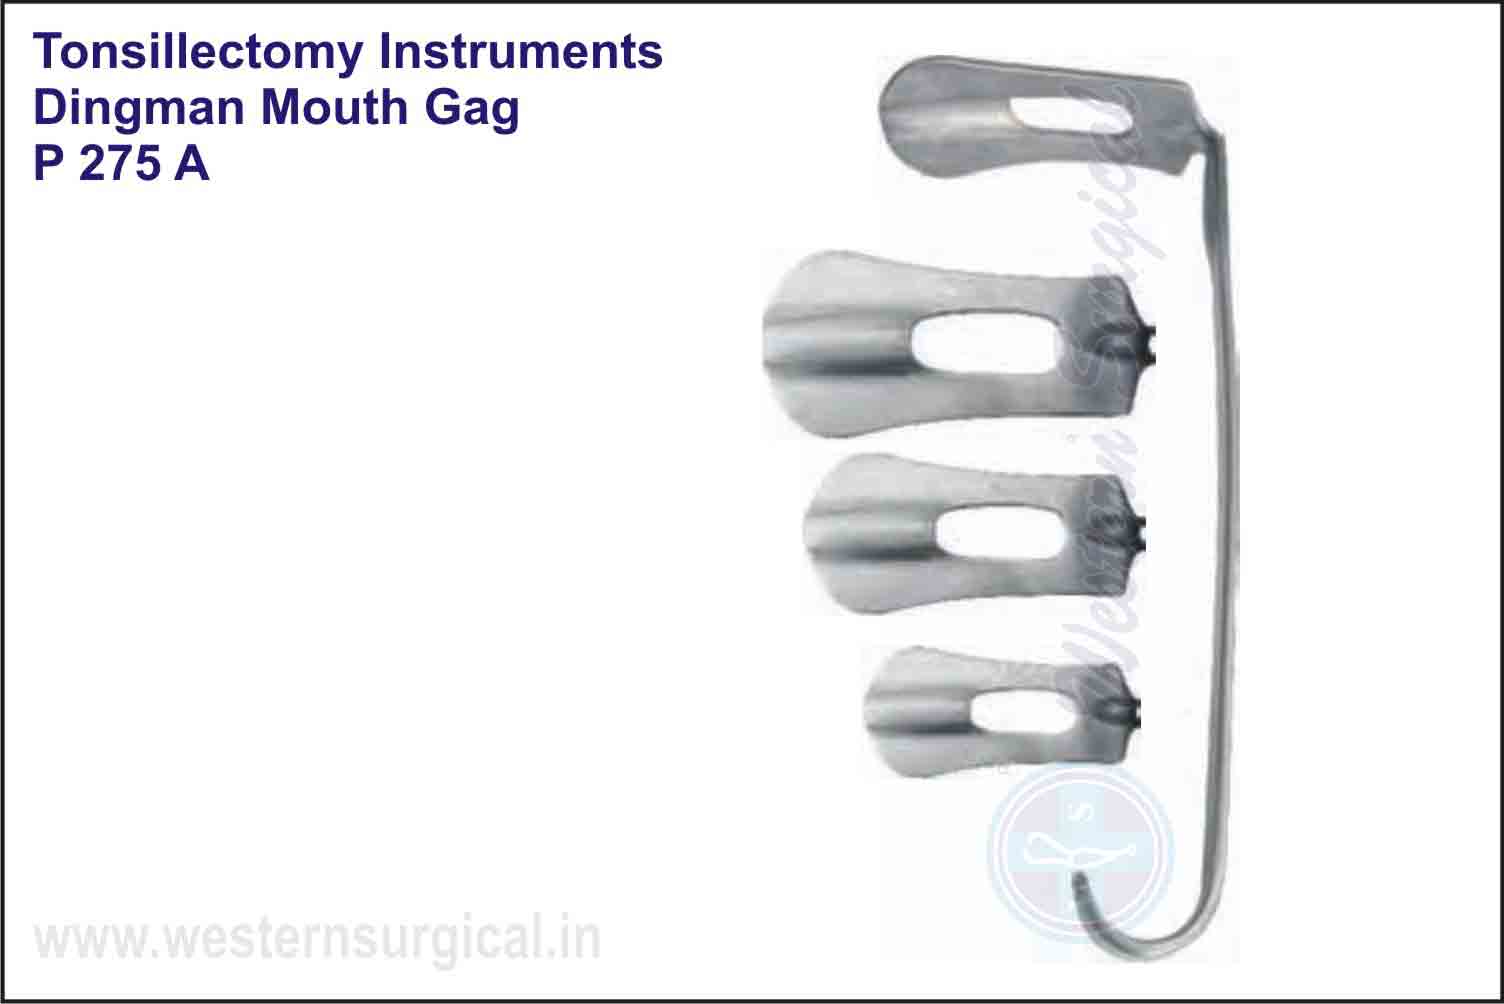 DINGMAN MOUTH GAG WITH 3 TONGUES PLATES